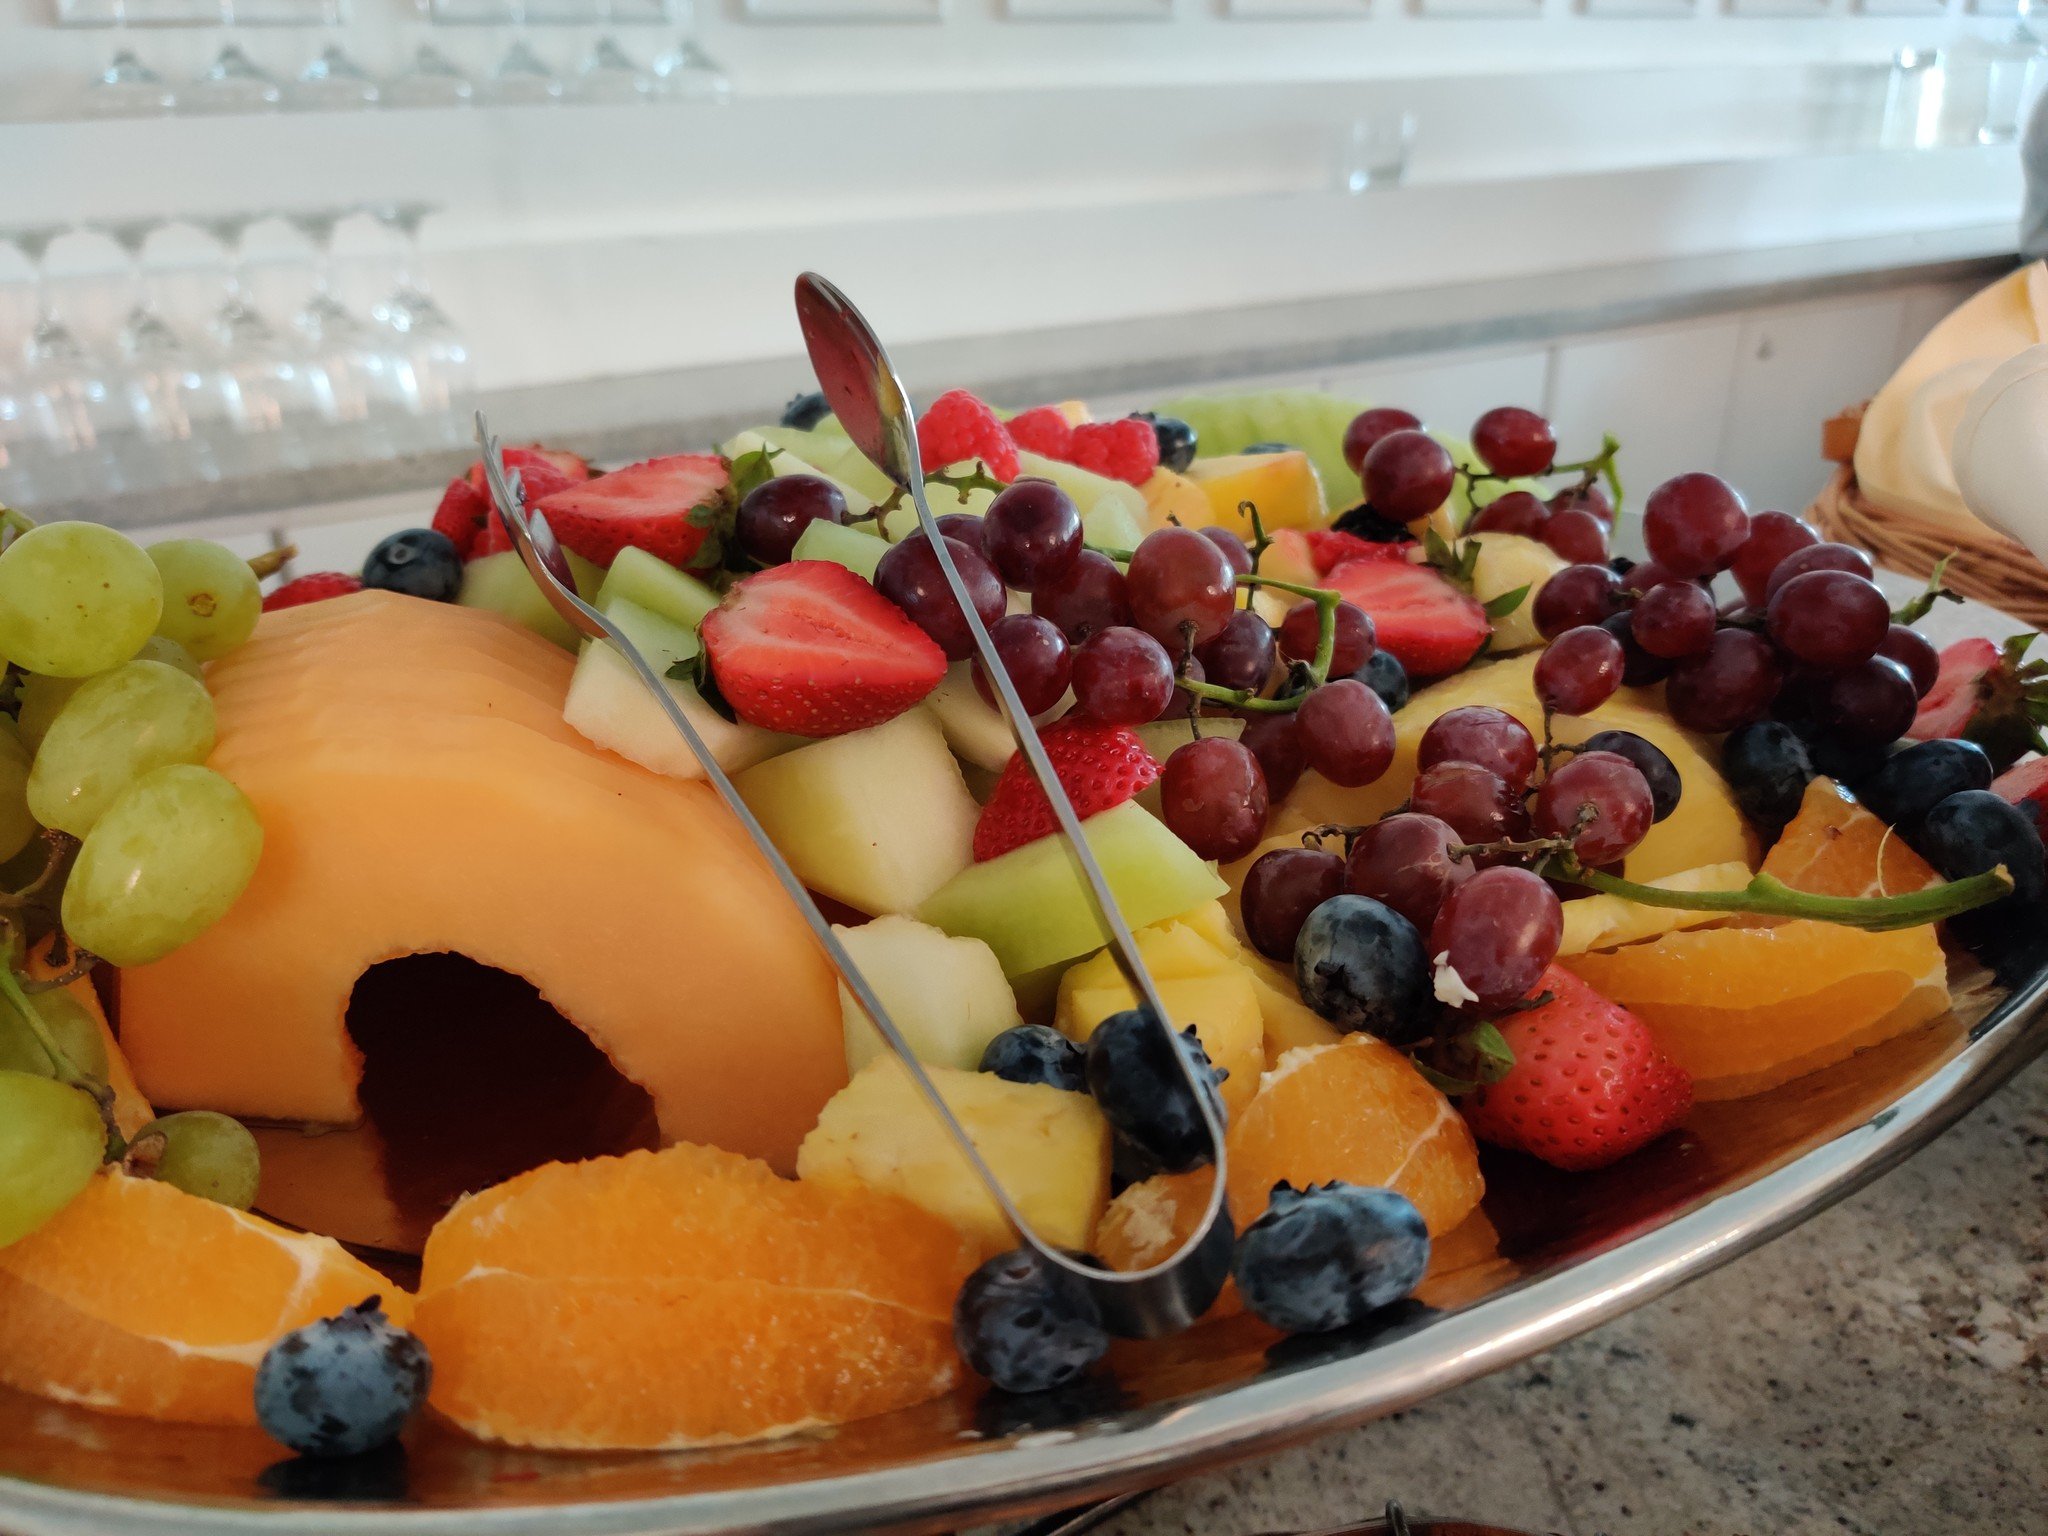 A beautiful, colorful fruit plate